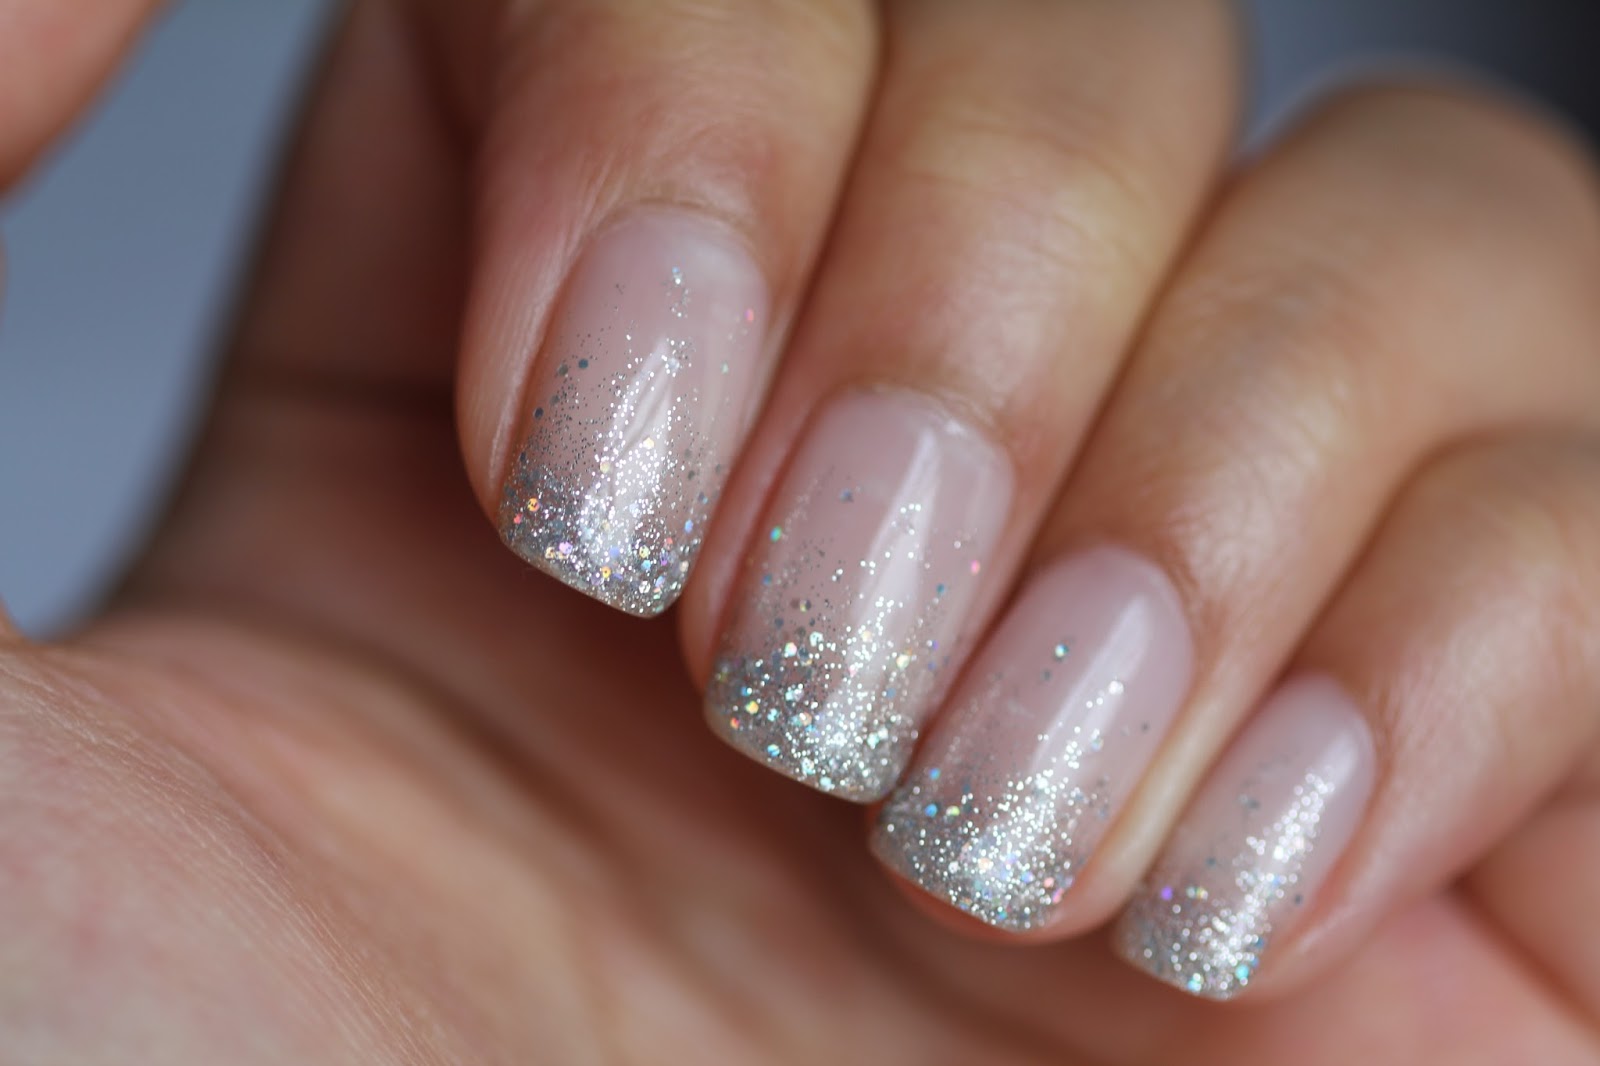 10. Stunning Gel Nail Art with Glitter and Rhinestones - wide 8